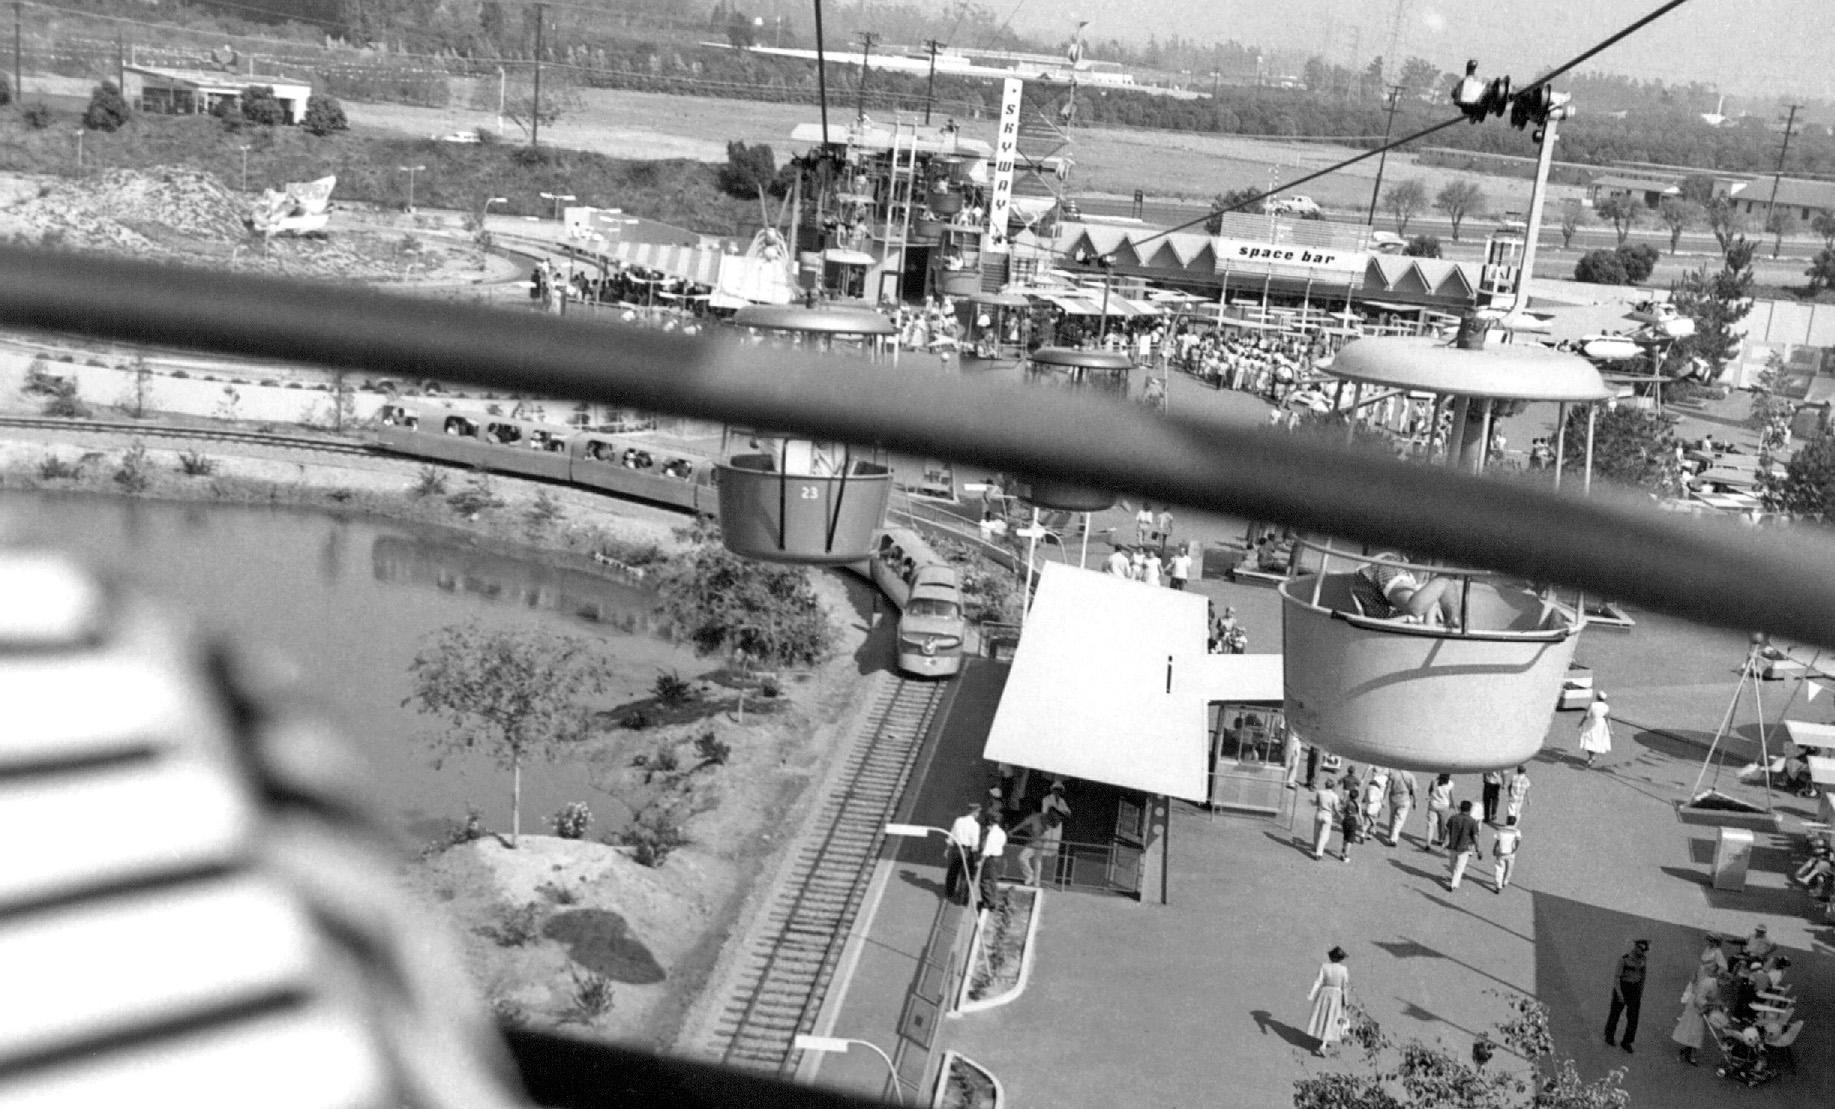 Here's a shot my dad took at Disneyland, summer 1955, from the Skyway. Note the undeveloped orchards in the background, and the 1940's-era car driving along the two-lane blacktop outside of the park. View has changed somewhat since then. View full size.